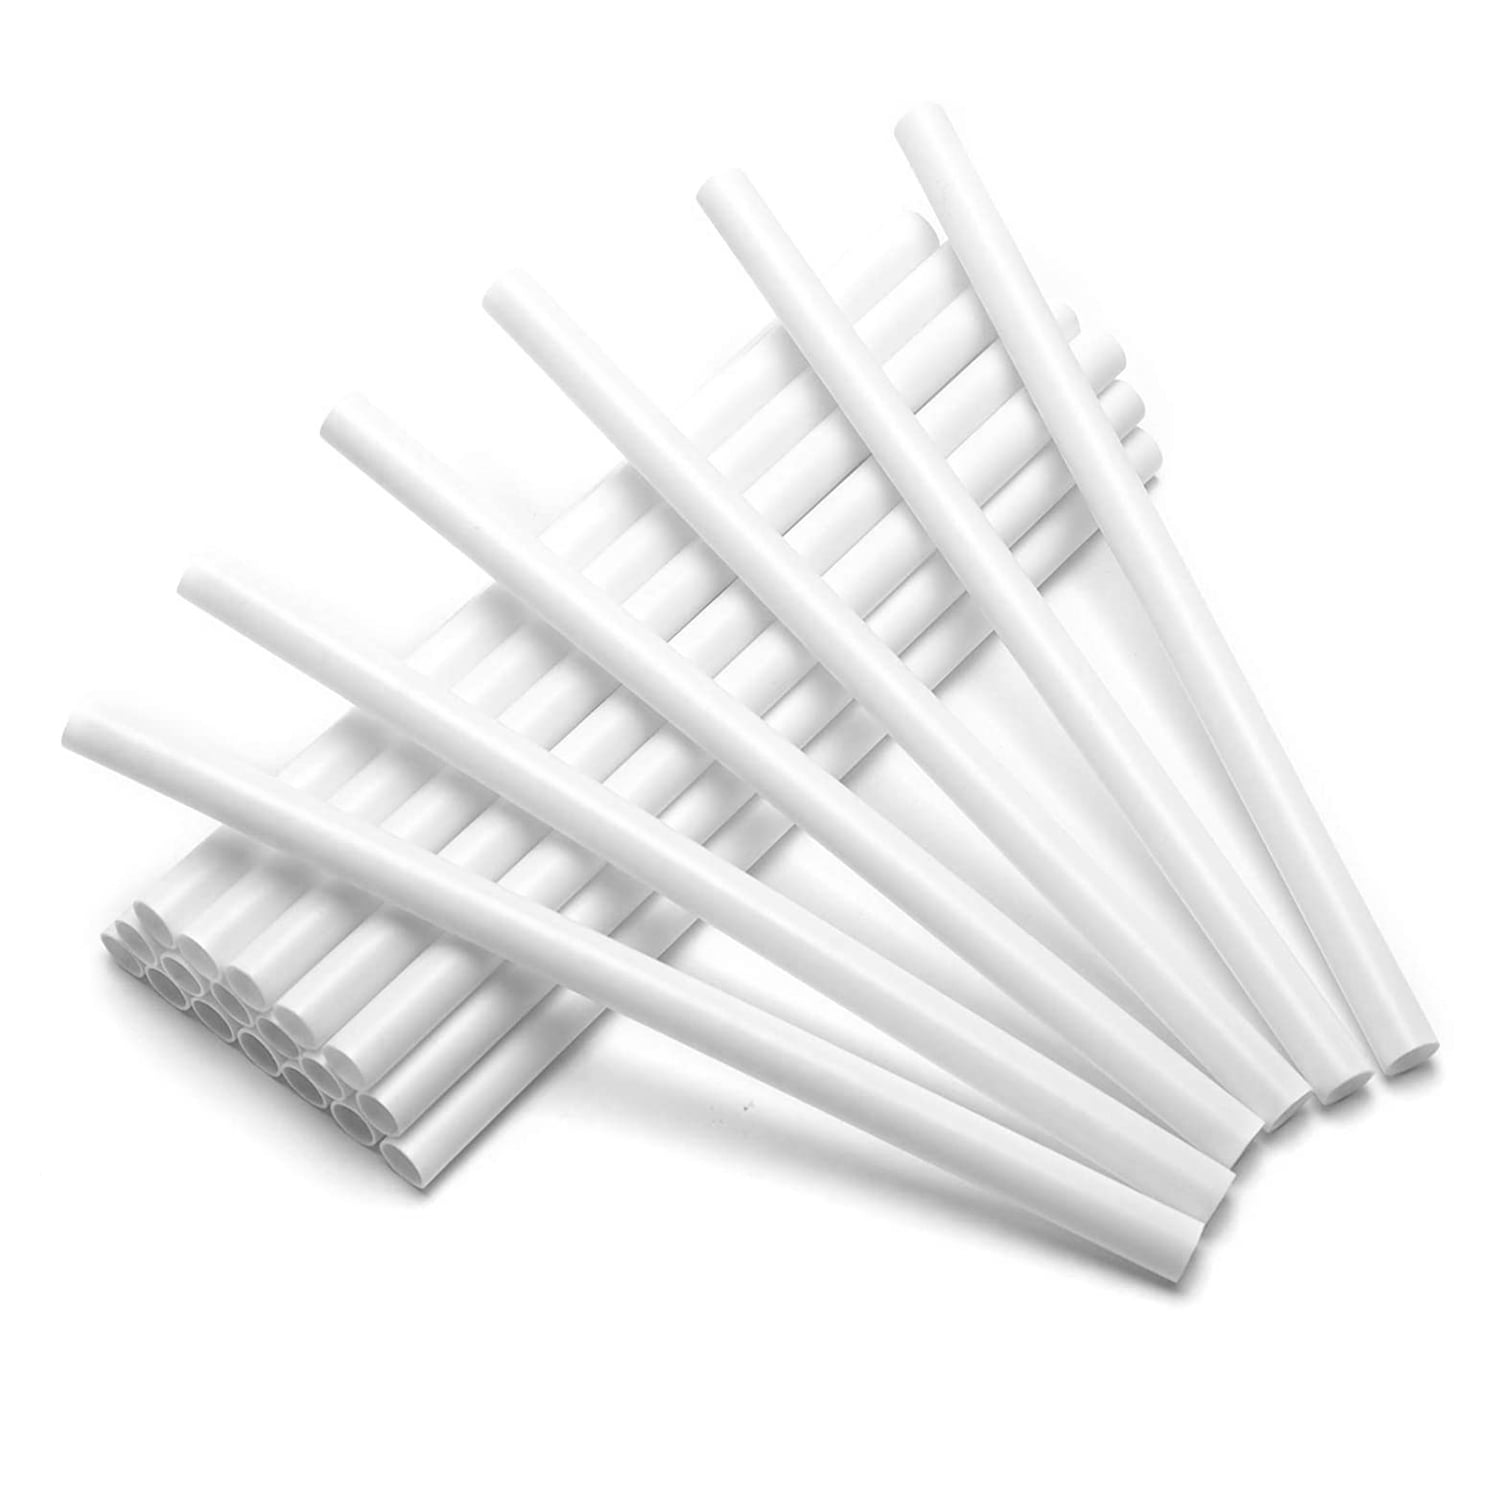 Cake Dowels (4 Pieces) Plastic Cake Support Rod